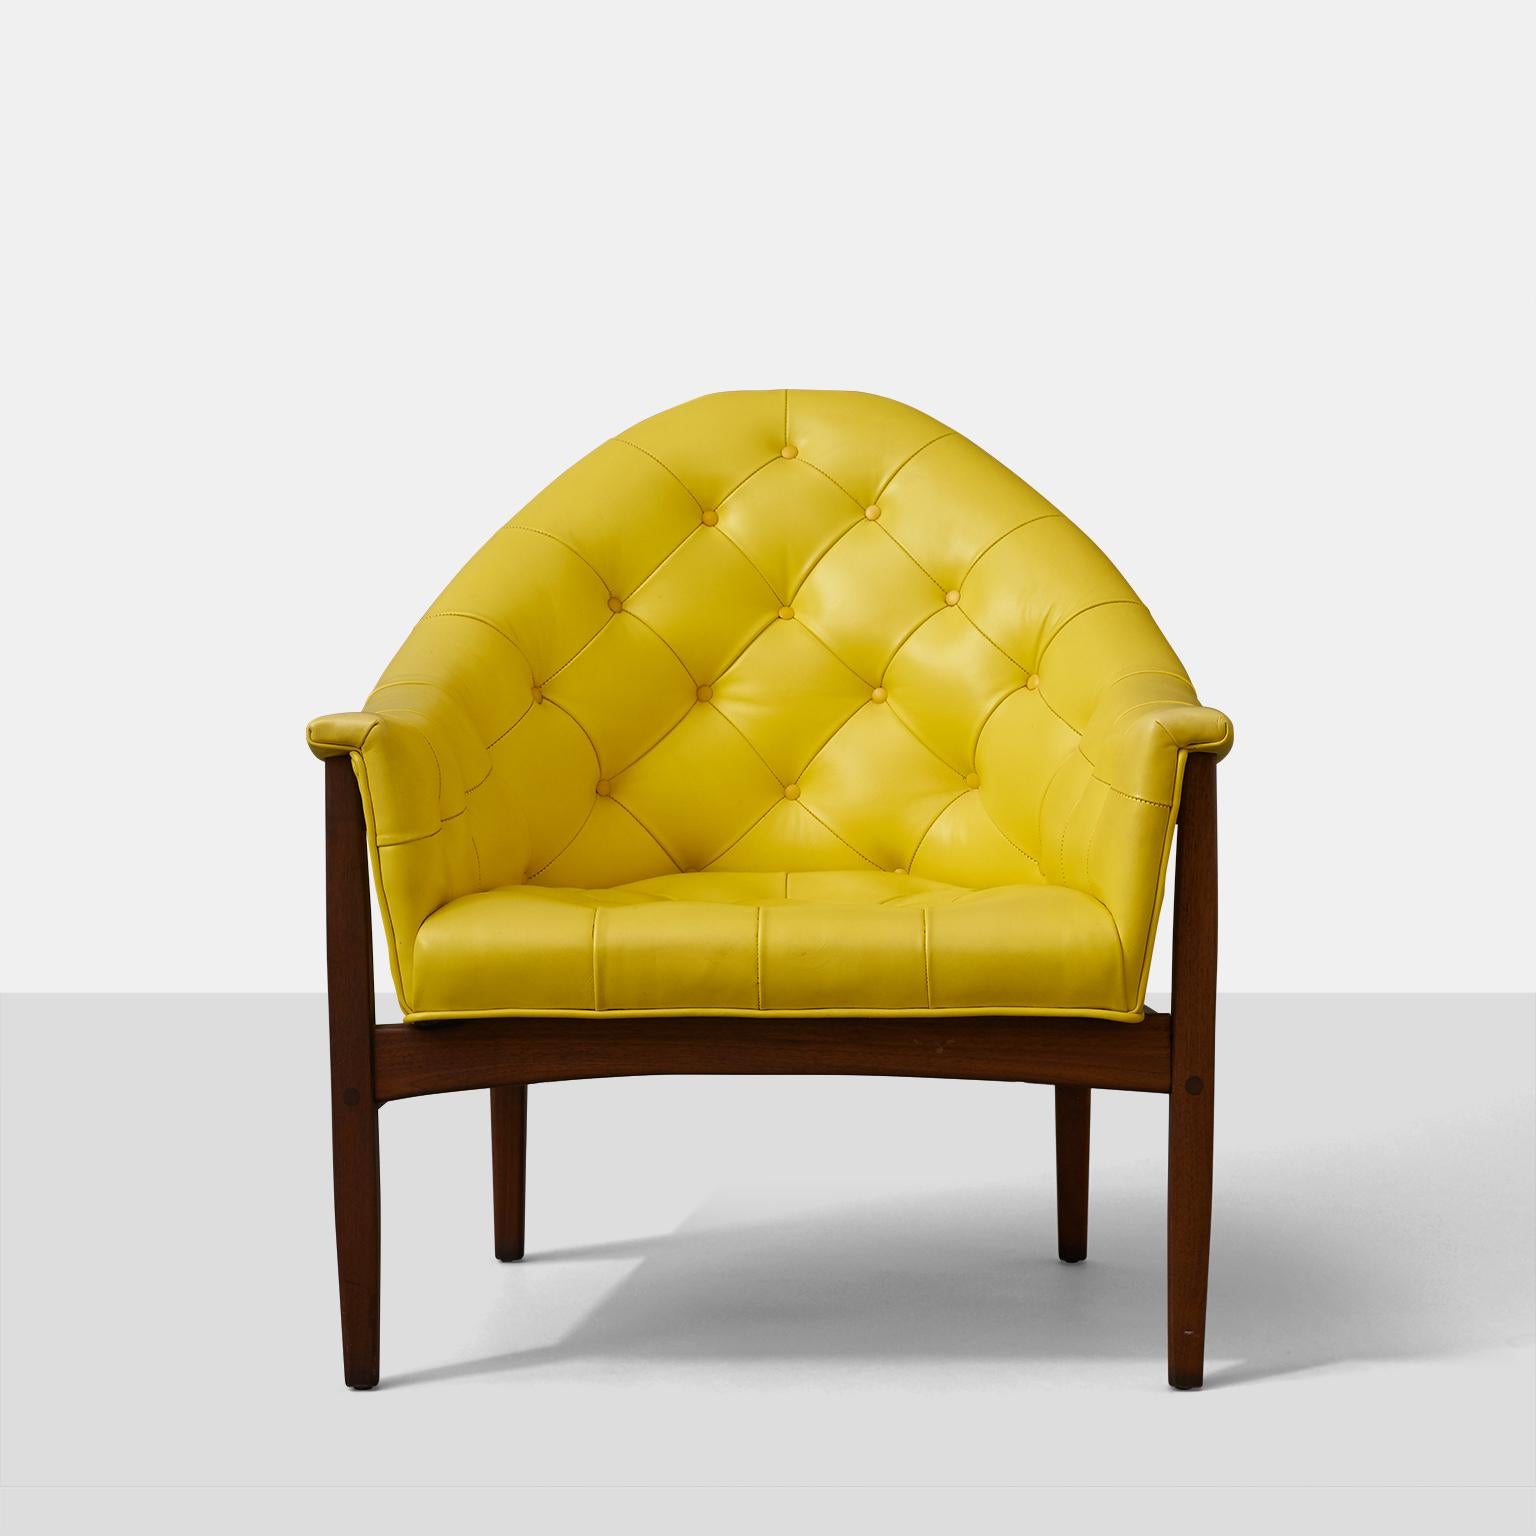 A set of four tufted lounge chairs by Milo Baughman for Thayer Coggin. Walnut frames and buttercup yellow upholstery. A rare early entry in Baughman and Coggin's three decade colaboration. Price is per set of 2.